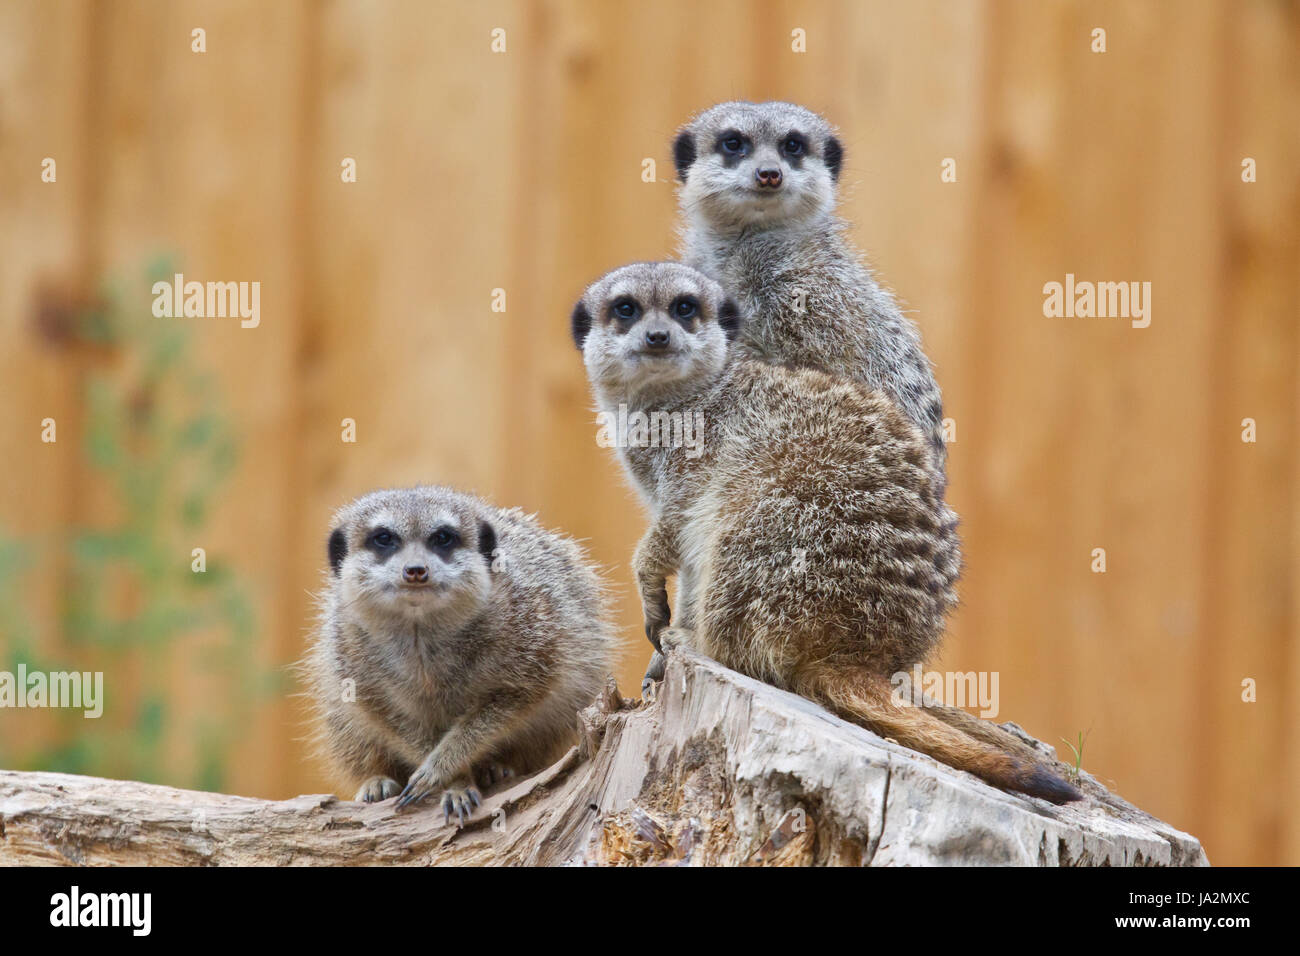 look, glancing, see, view, looking, peeking, looking at, wise, attentive, Stock Photo